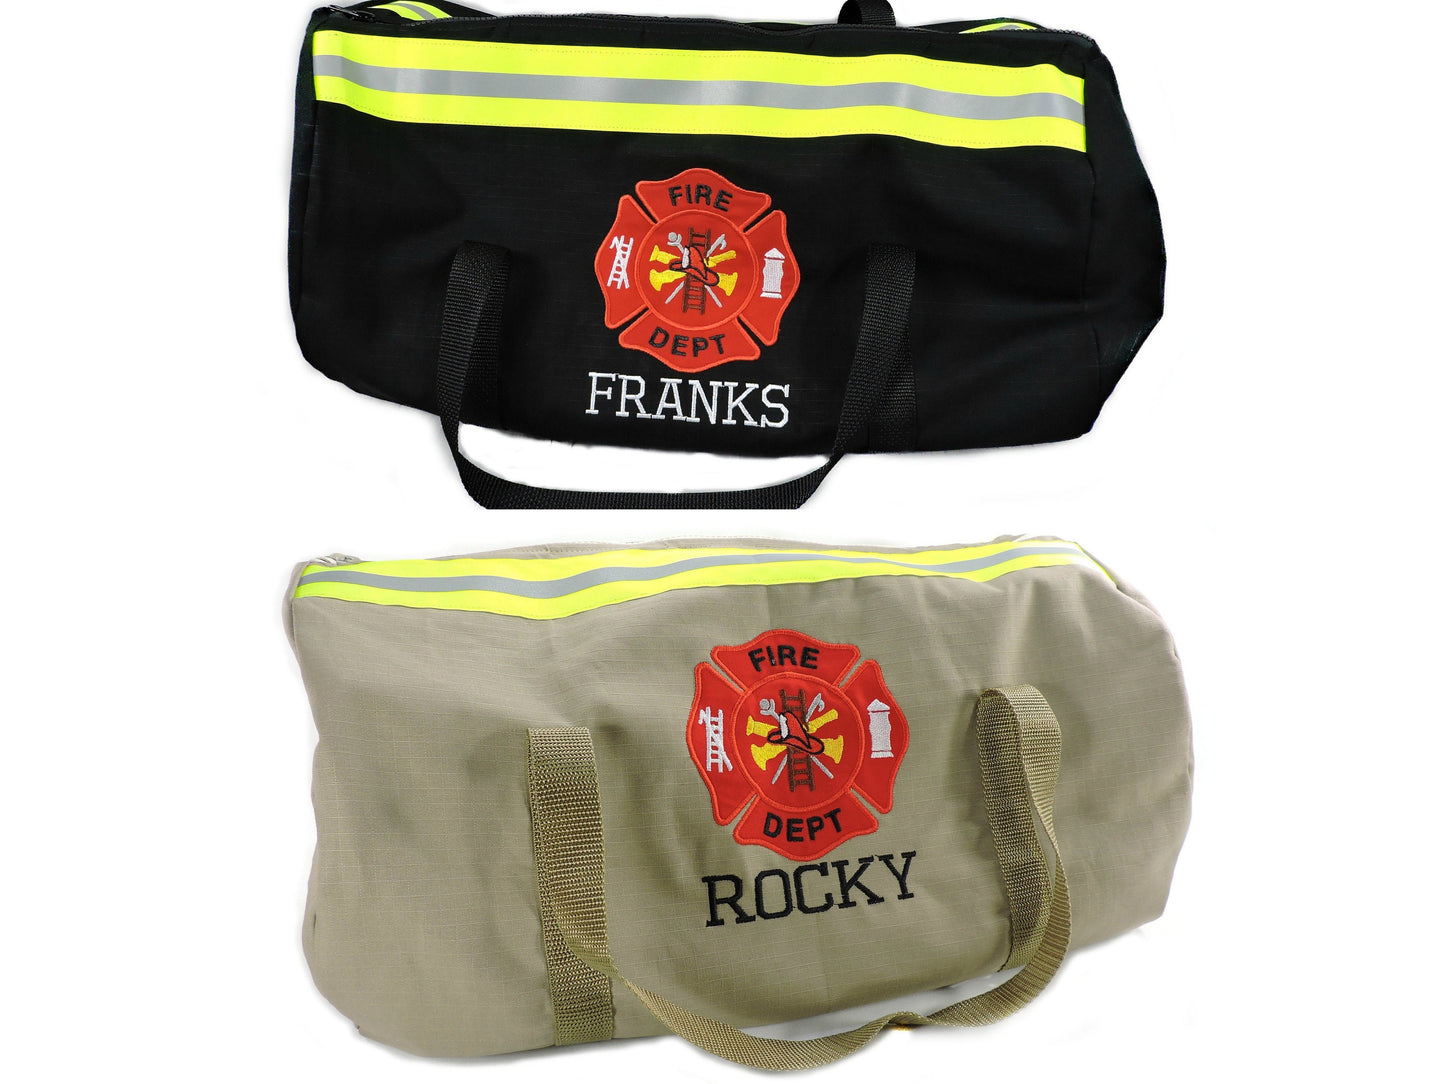 firefighter duffel bags with neon yellow tape